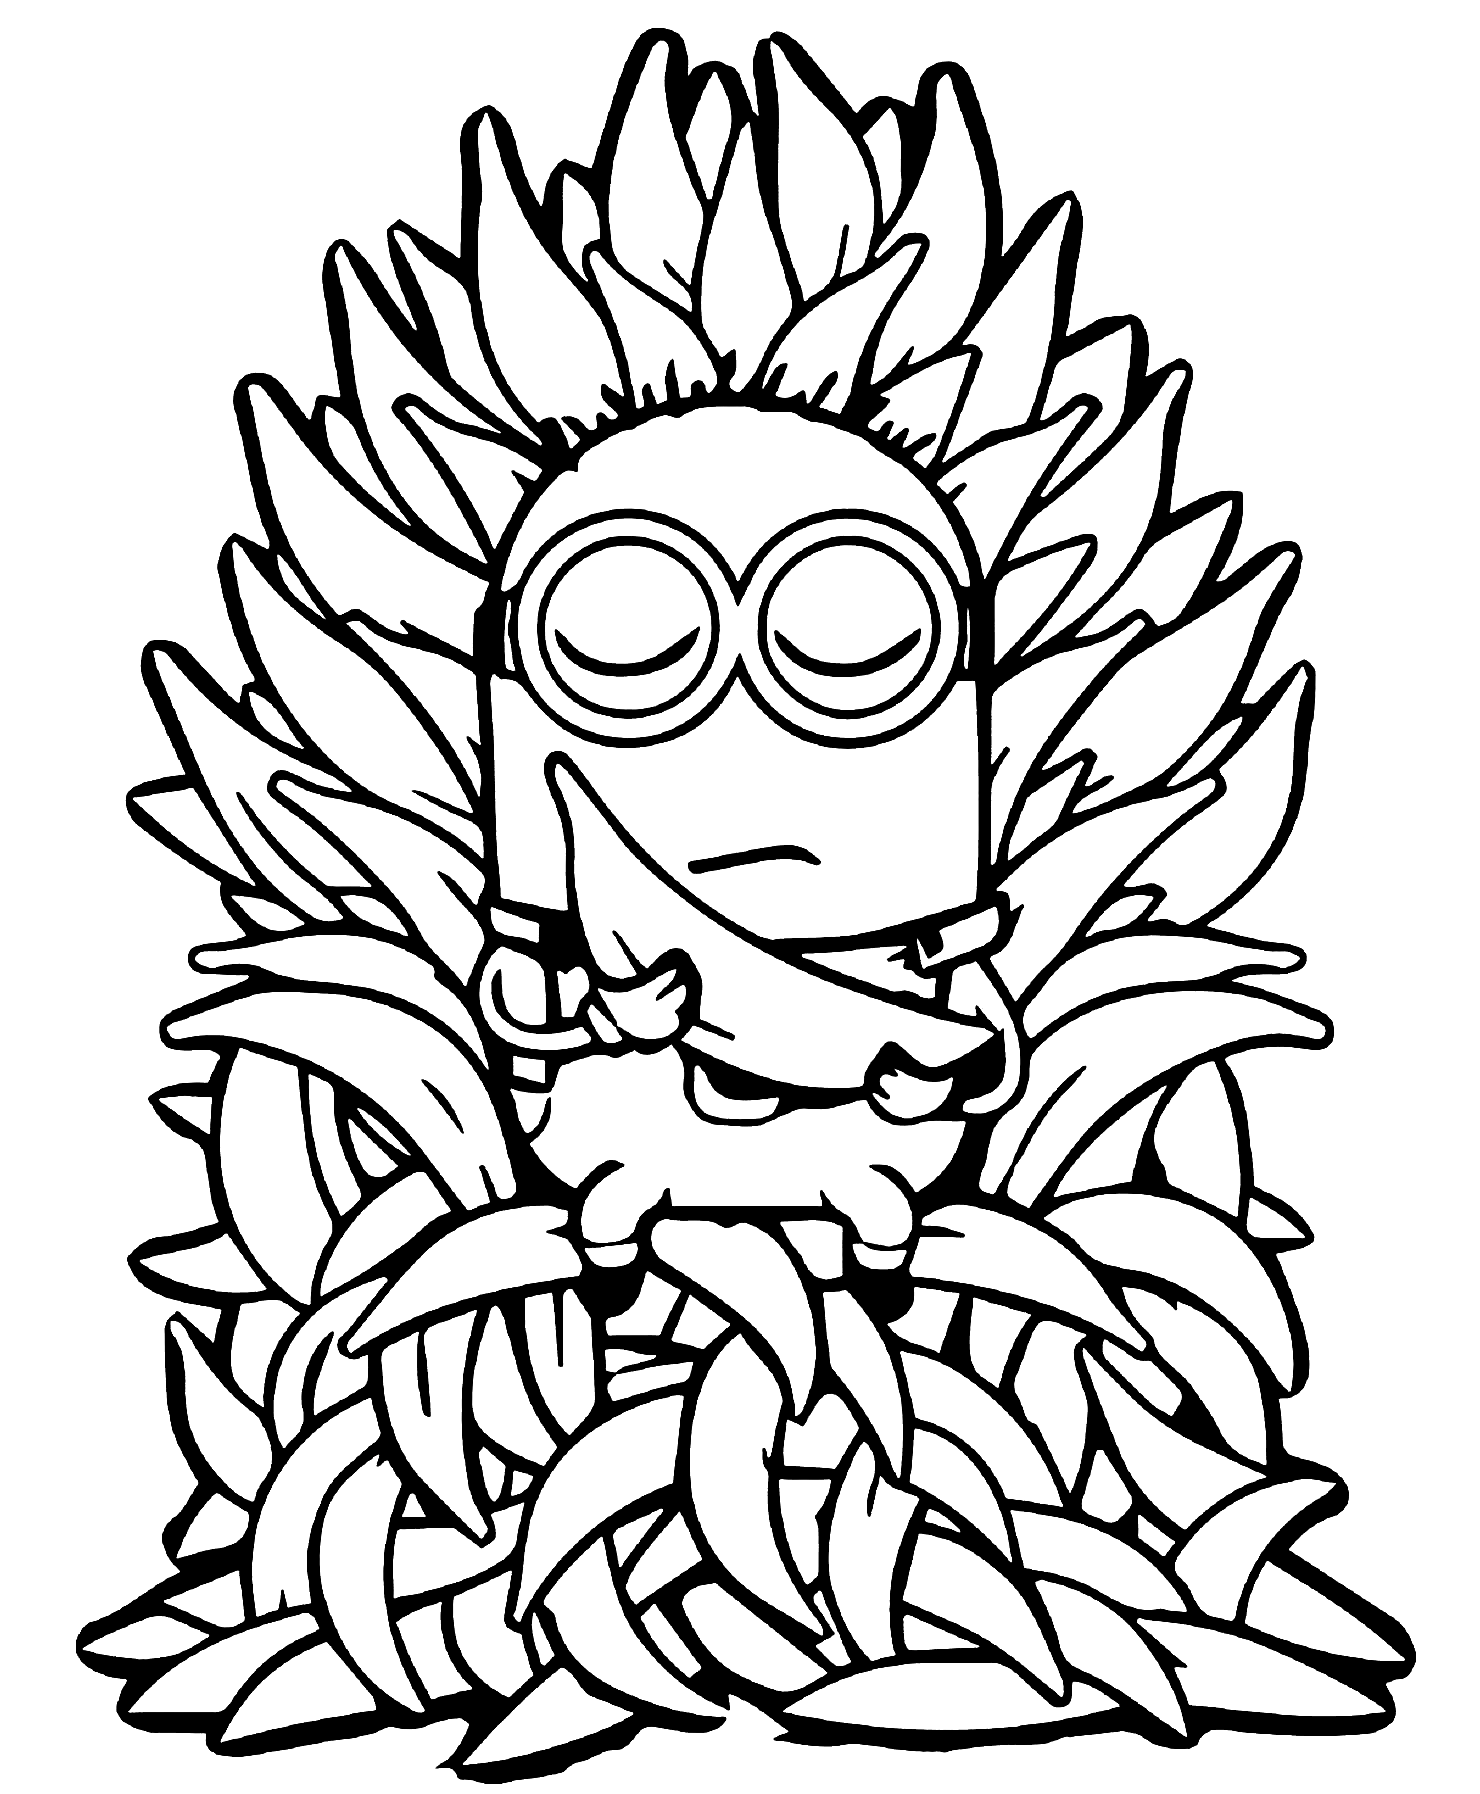 Minion and Many Bananas Coloring Pages